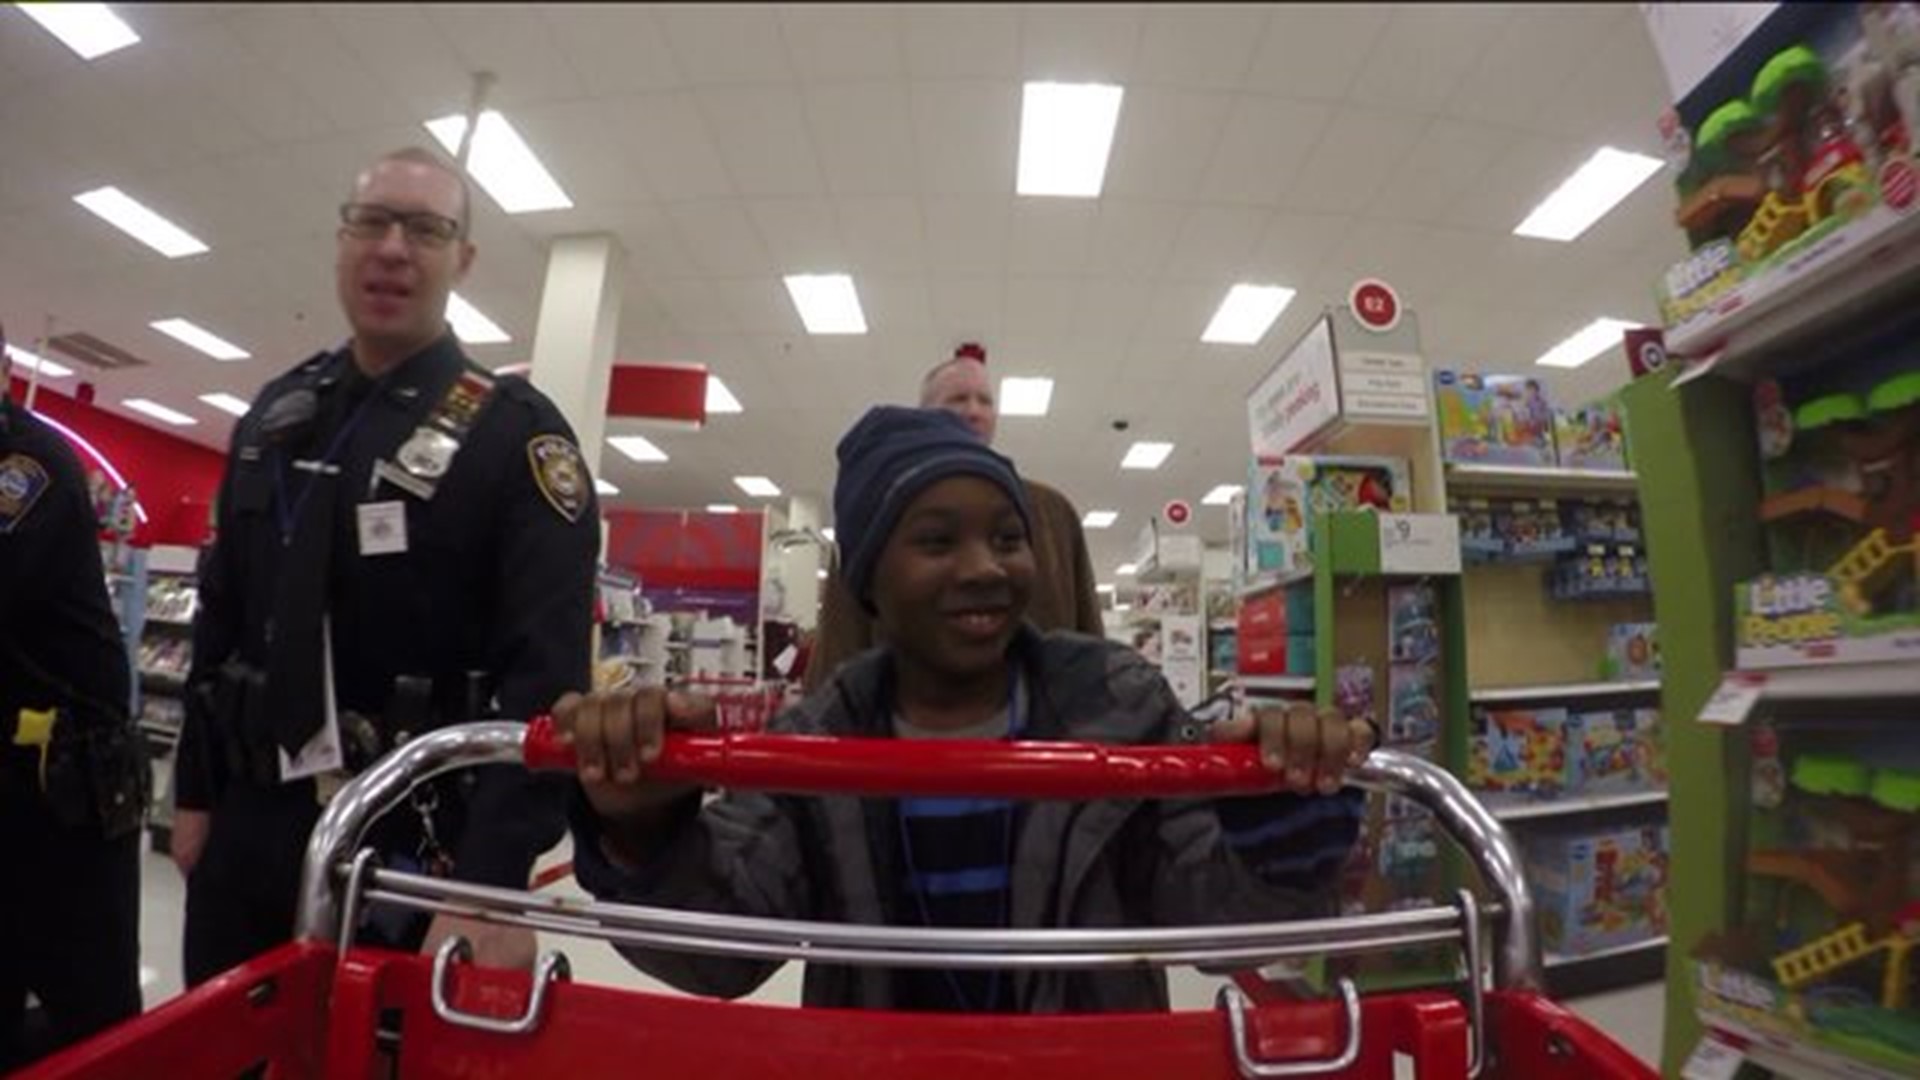 Officers offer kids the chance to shop for the holidays without their parents